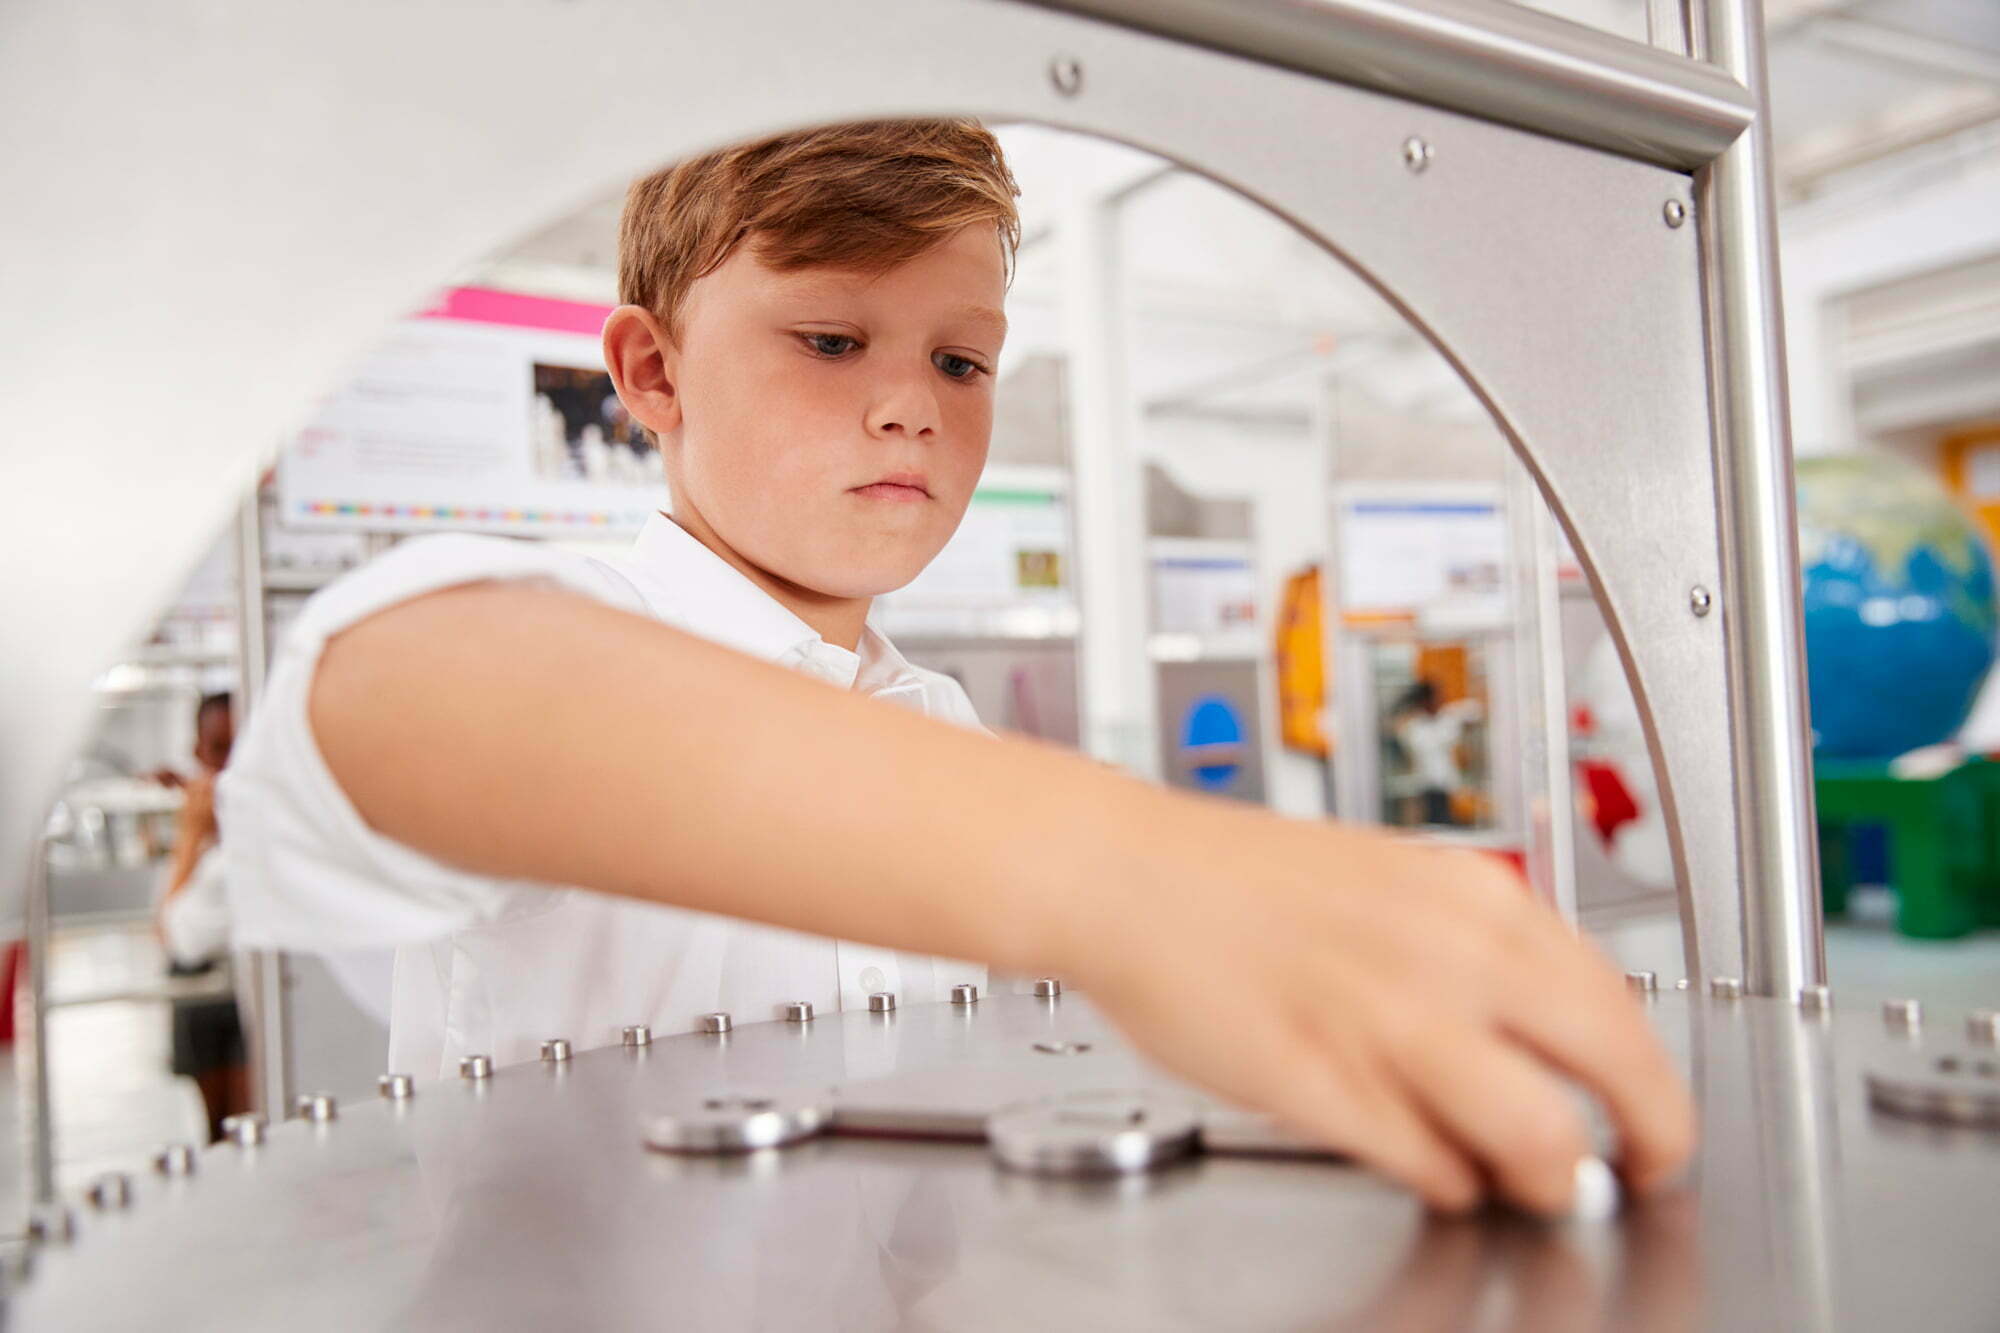 Effects of Introducing STEM Education Early On